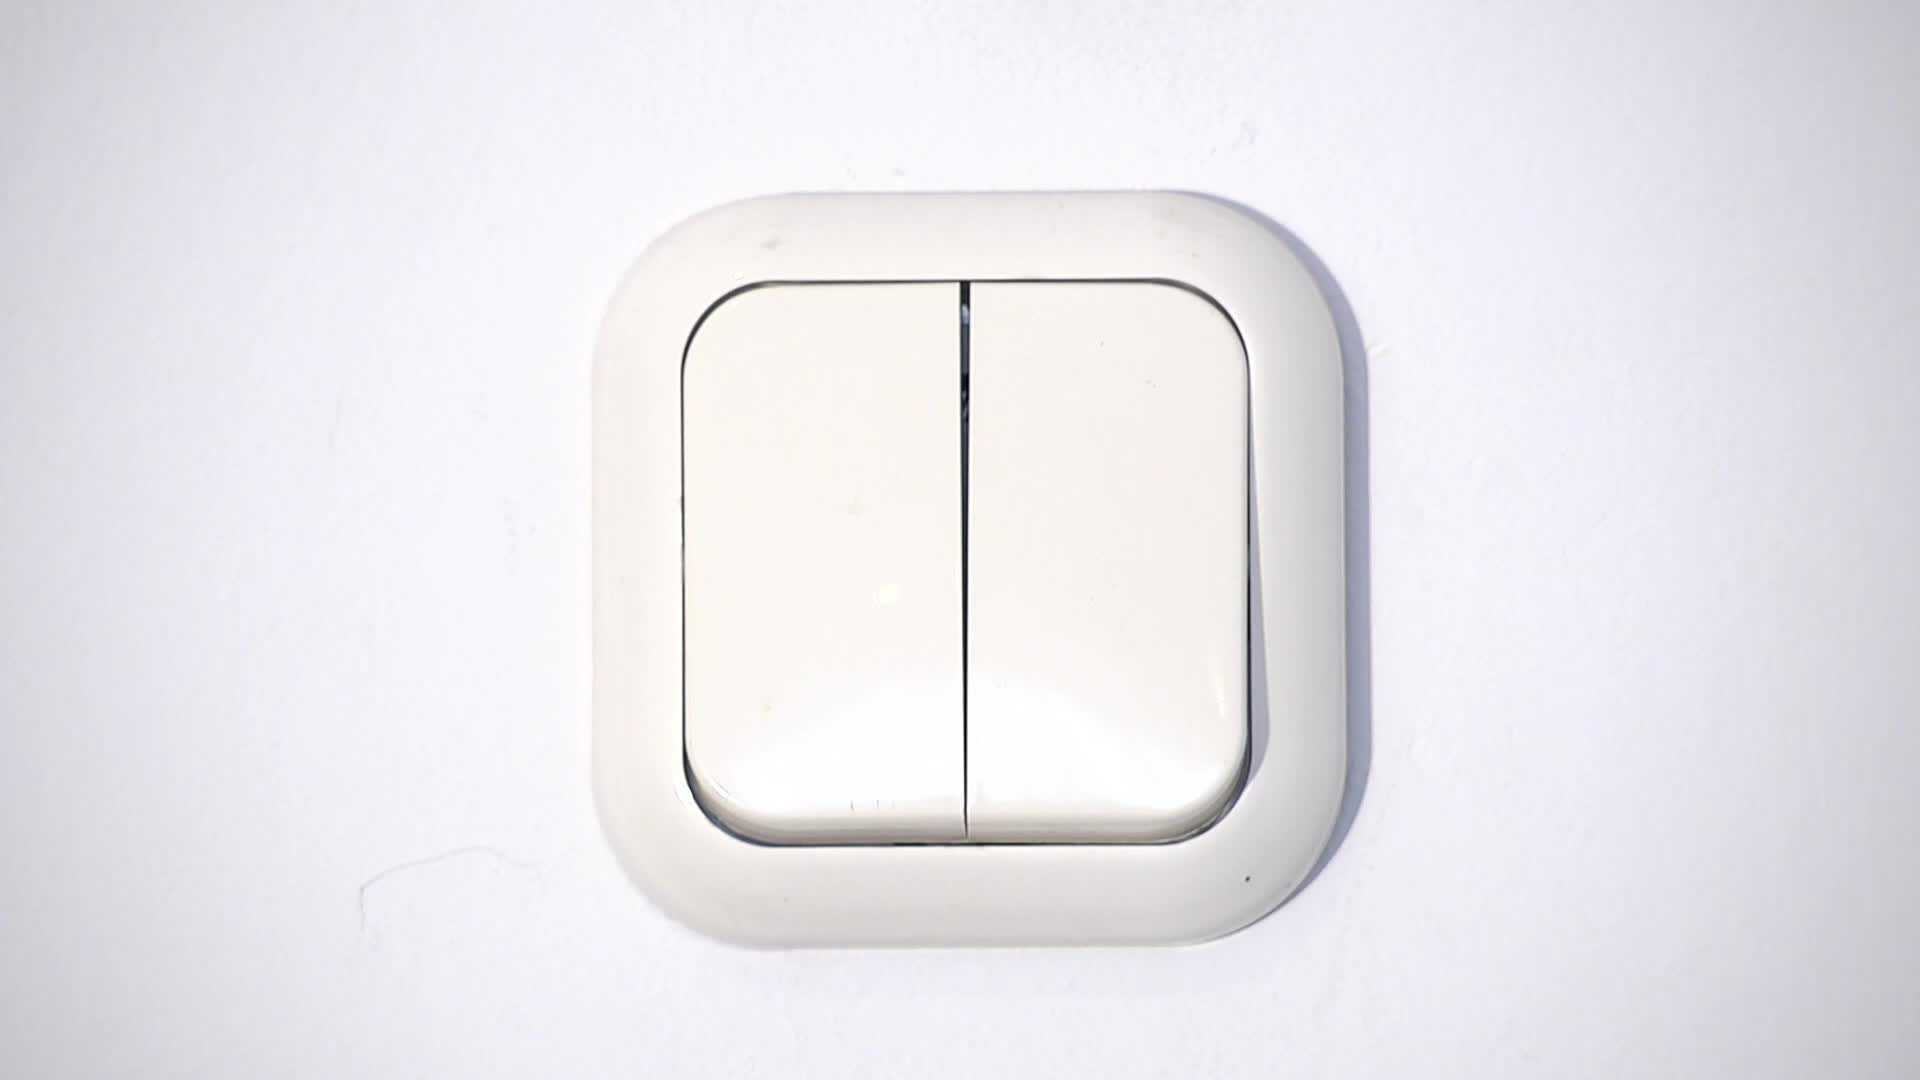 the side of a light switch mounted on a wall